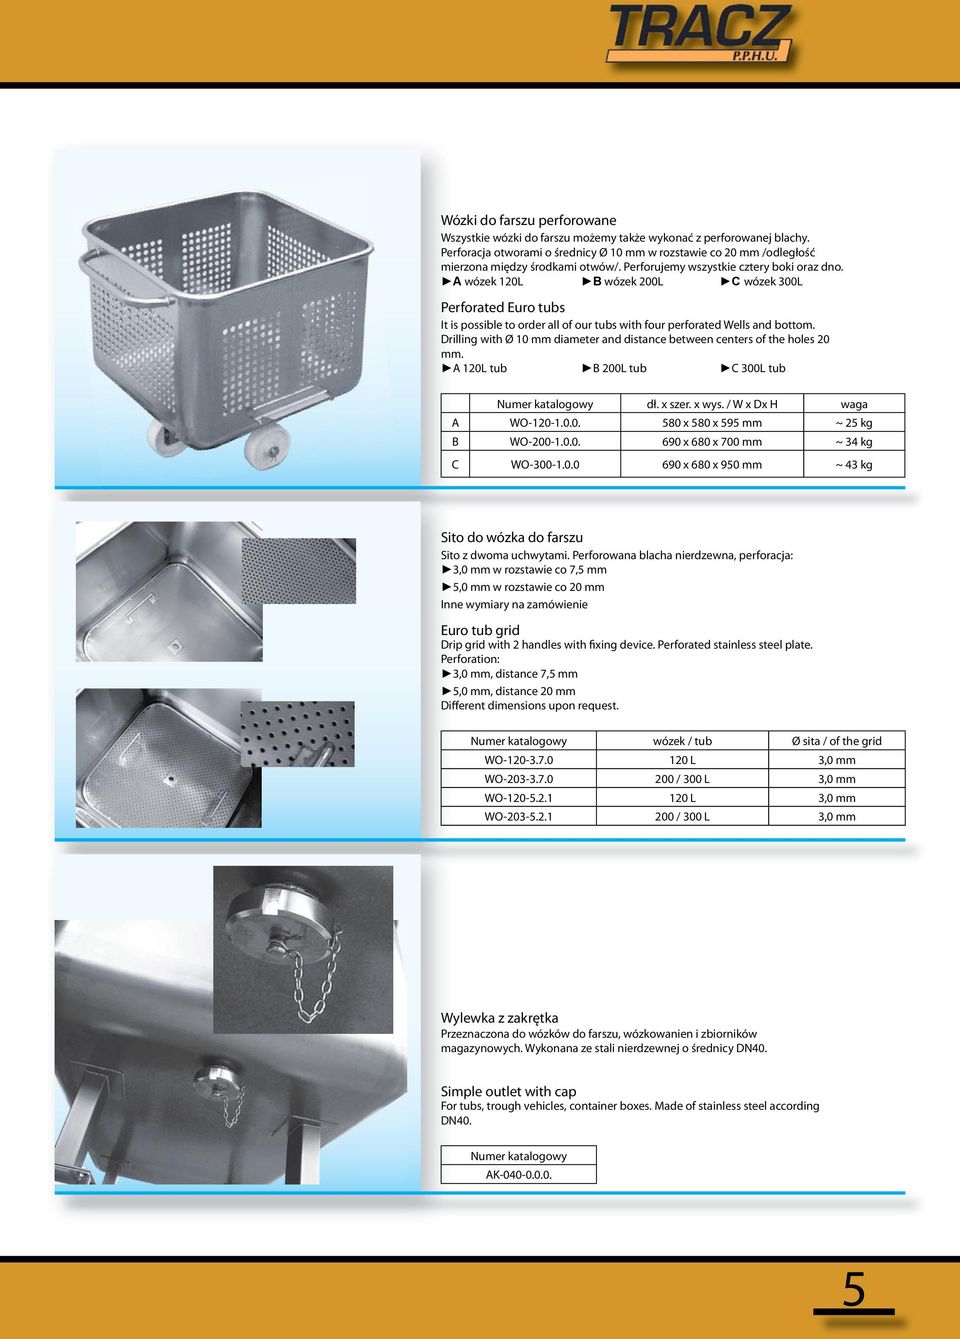 A wózek 120L B wózek 200L C wózek 300L Perforated Euro tubs It is possible to order all of our tubs with four perforated Wells and bottom.